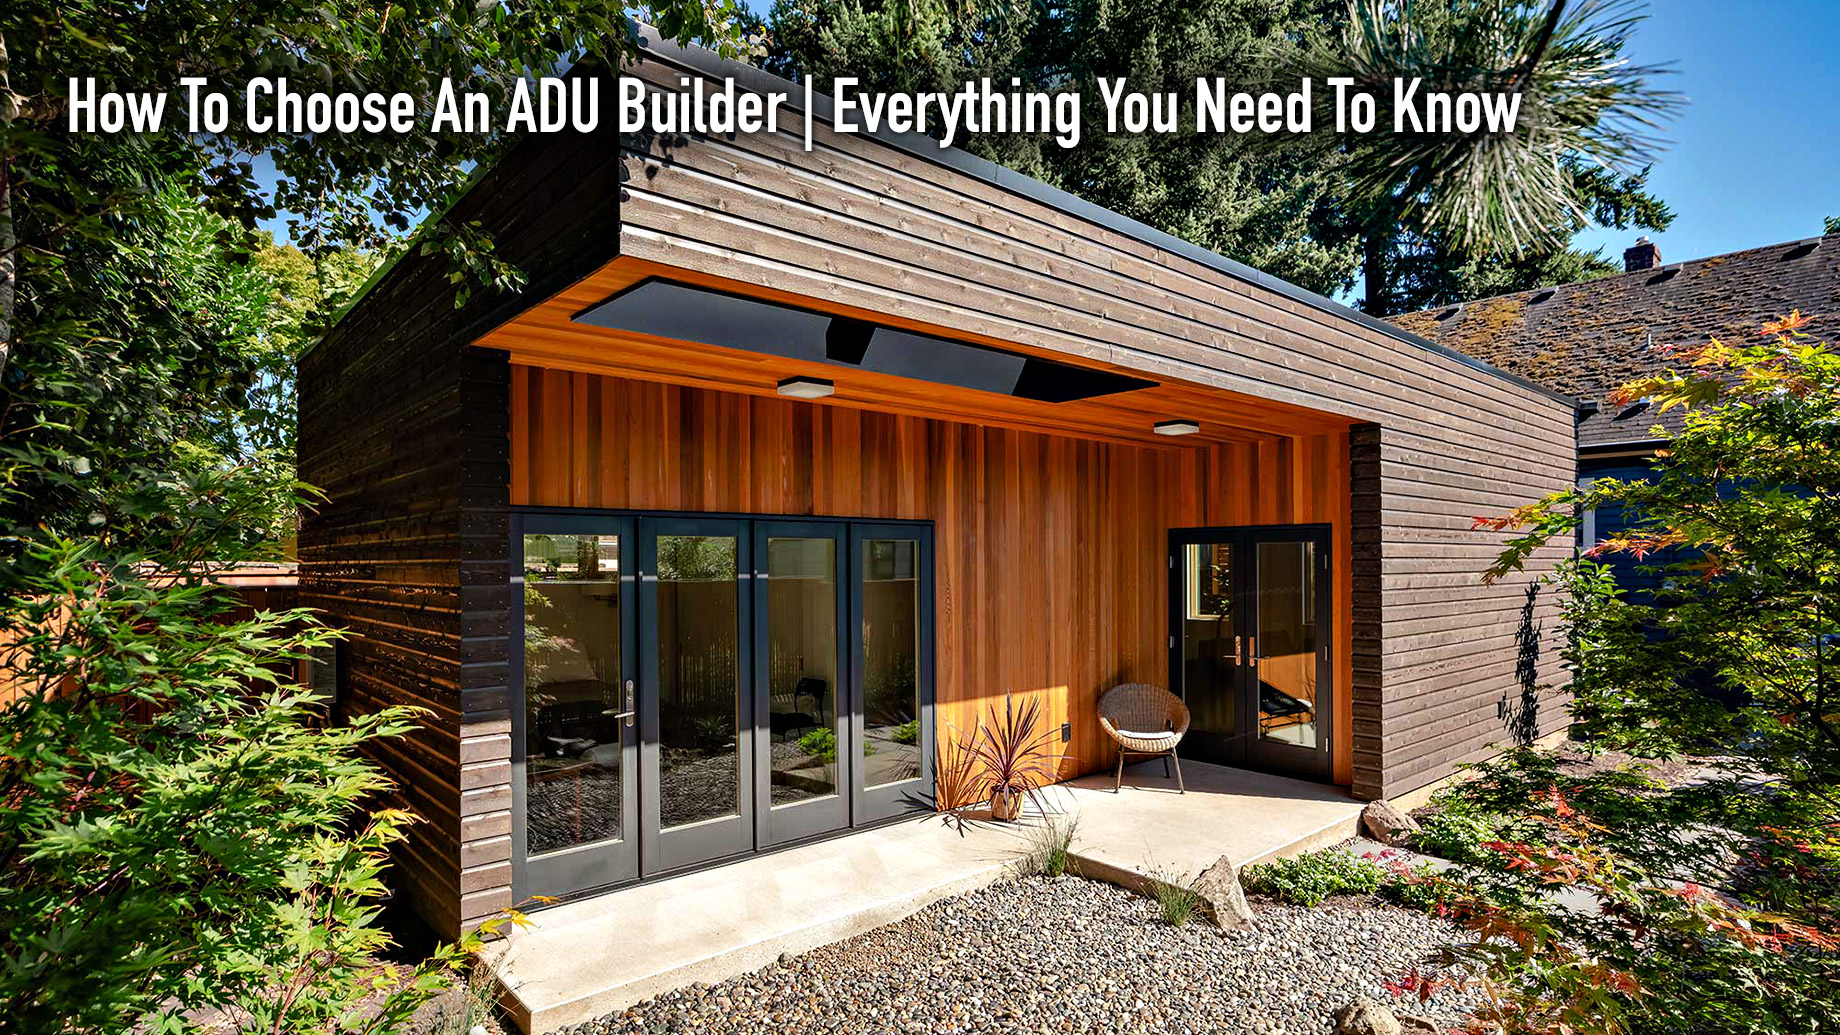 How To Choose An ADU Builder - Everything You Need To Know